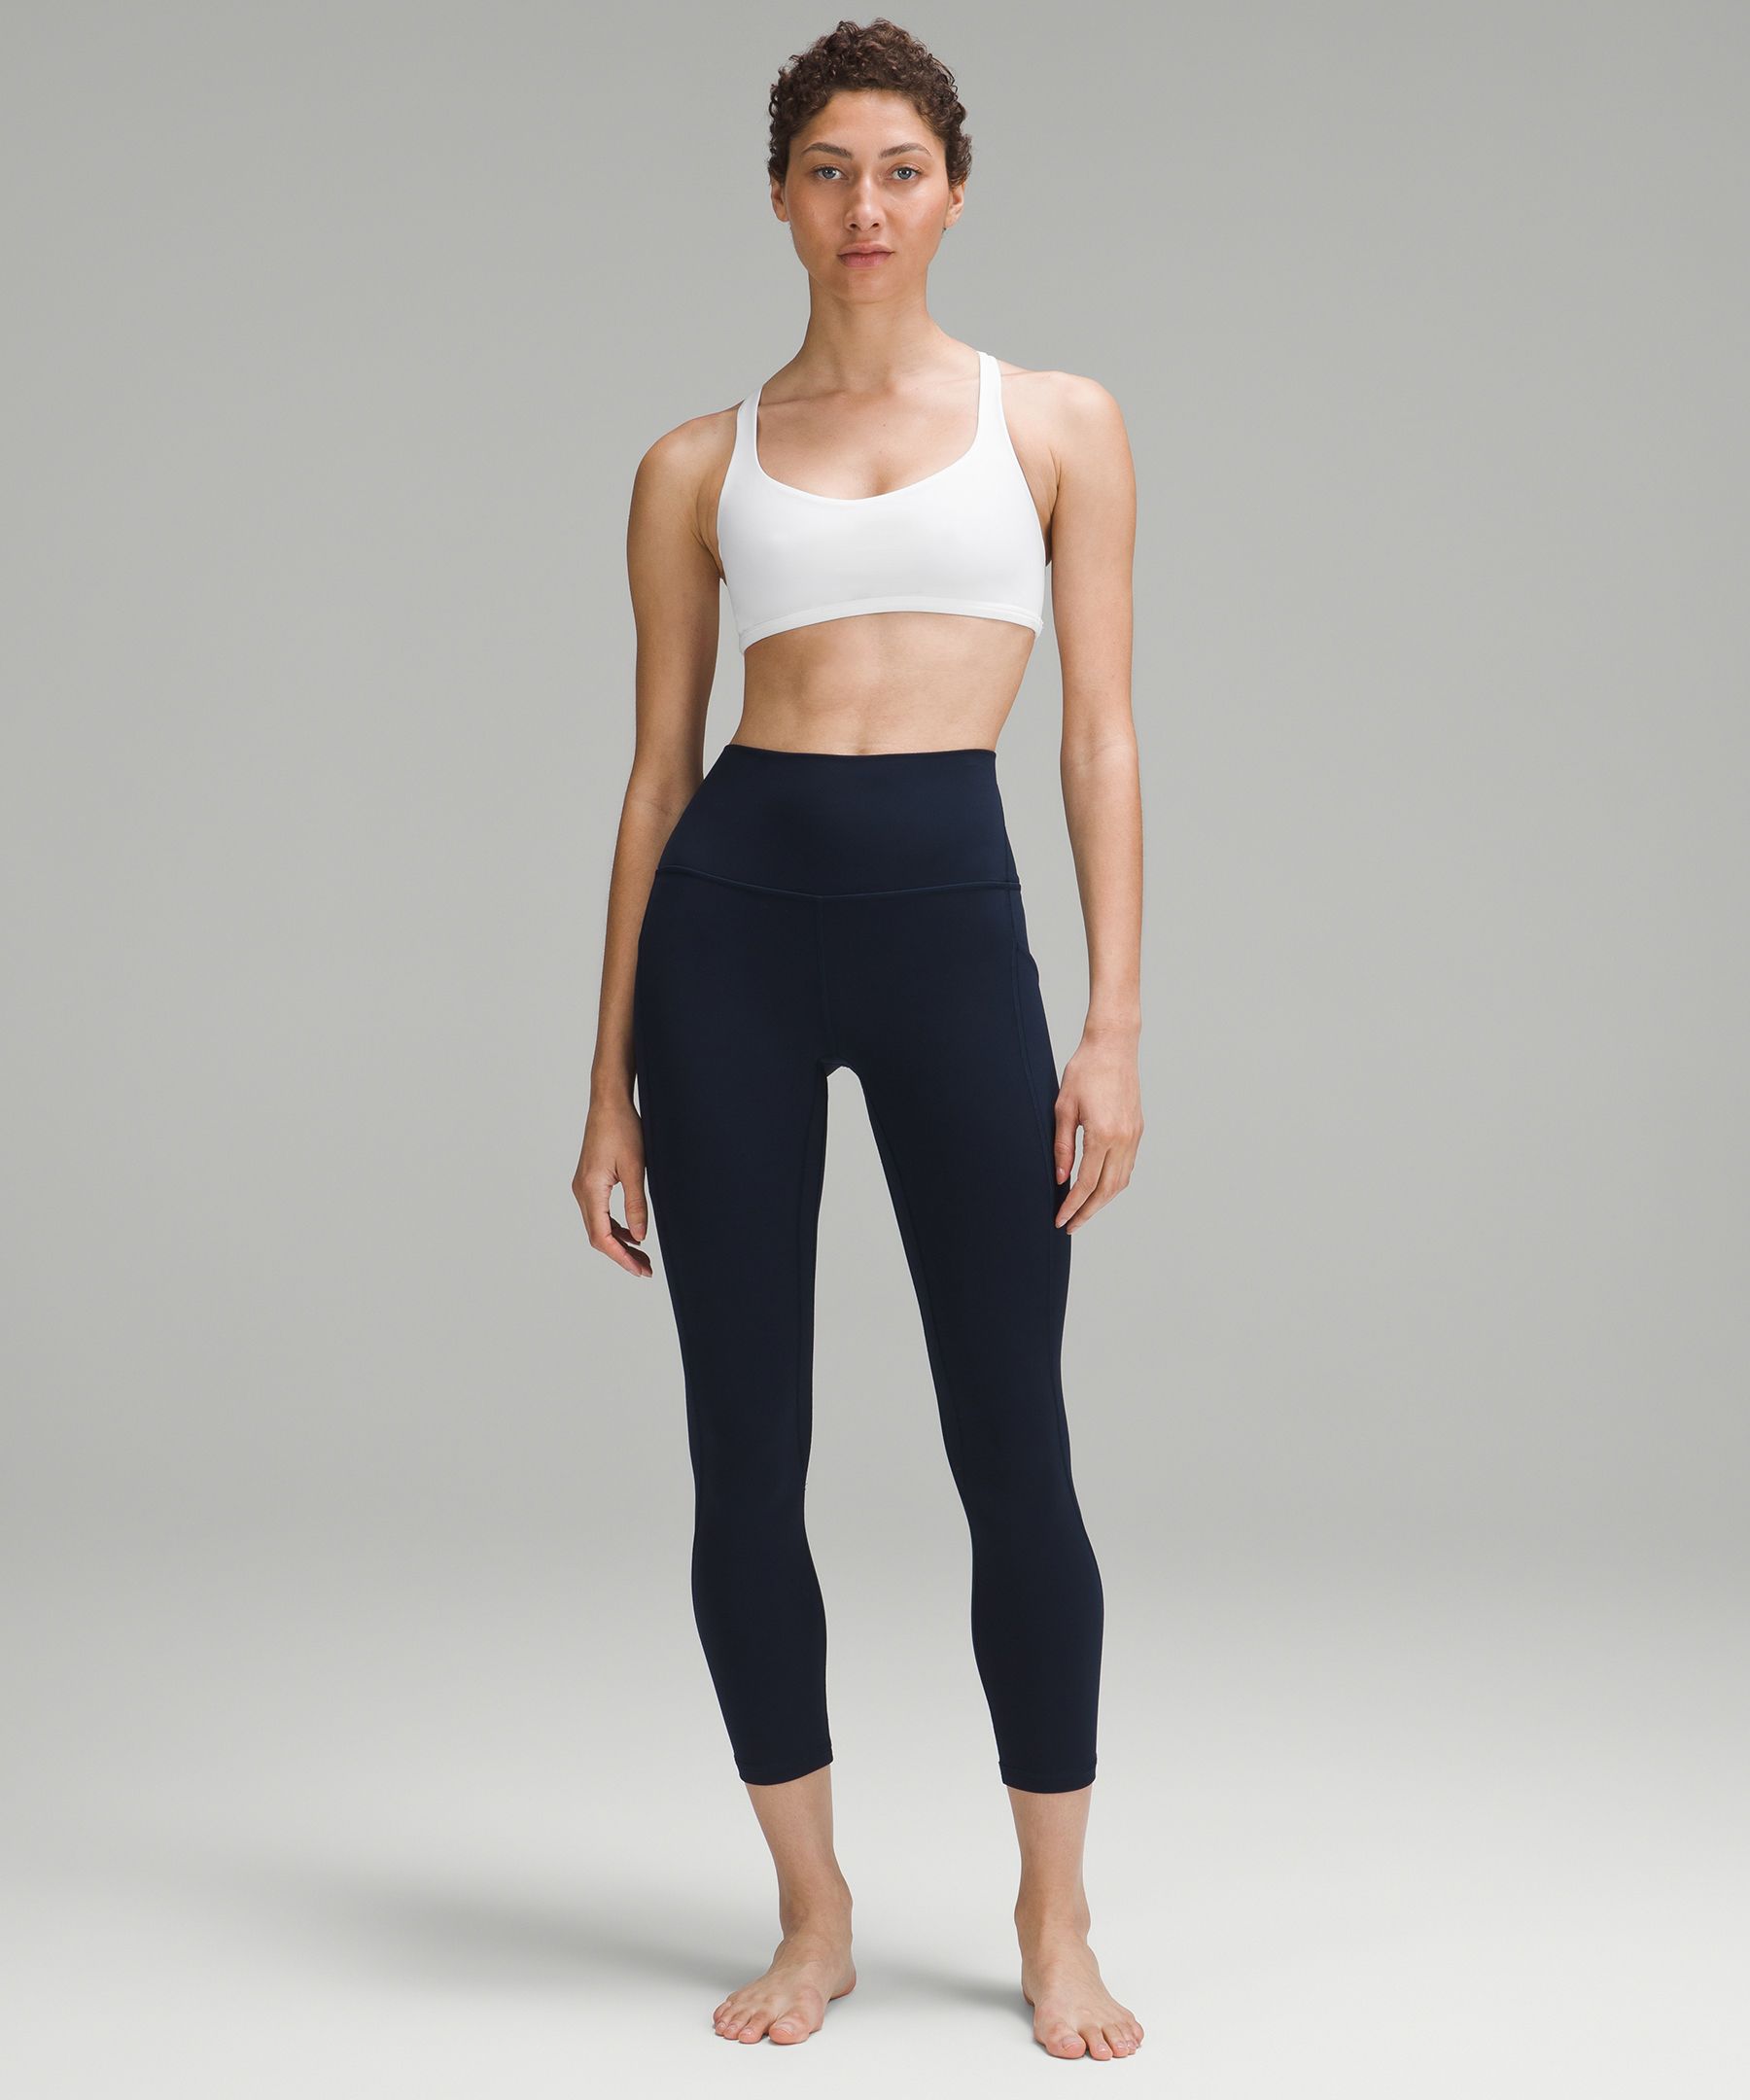 Lululemon Free to Be Bra - Wild *Light Support, A/B Cup - 139351023